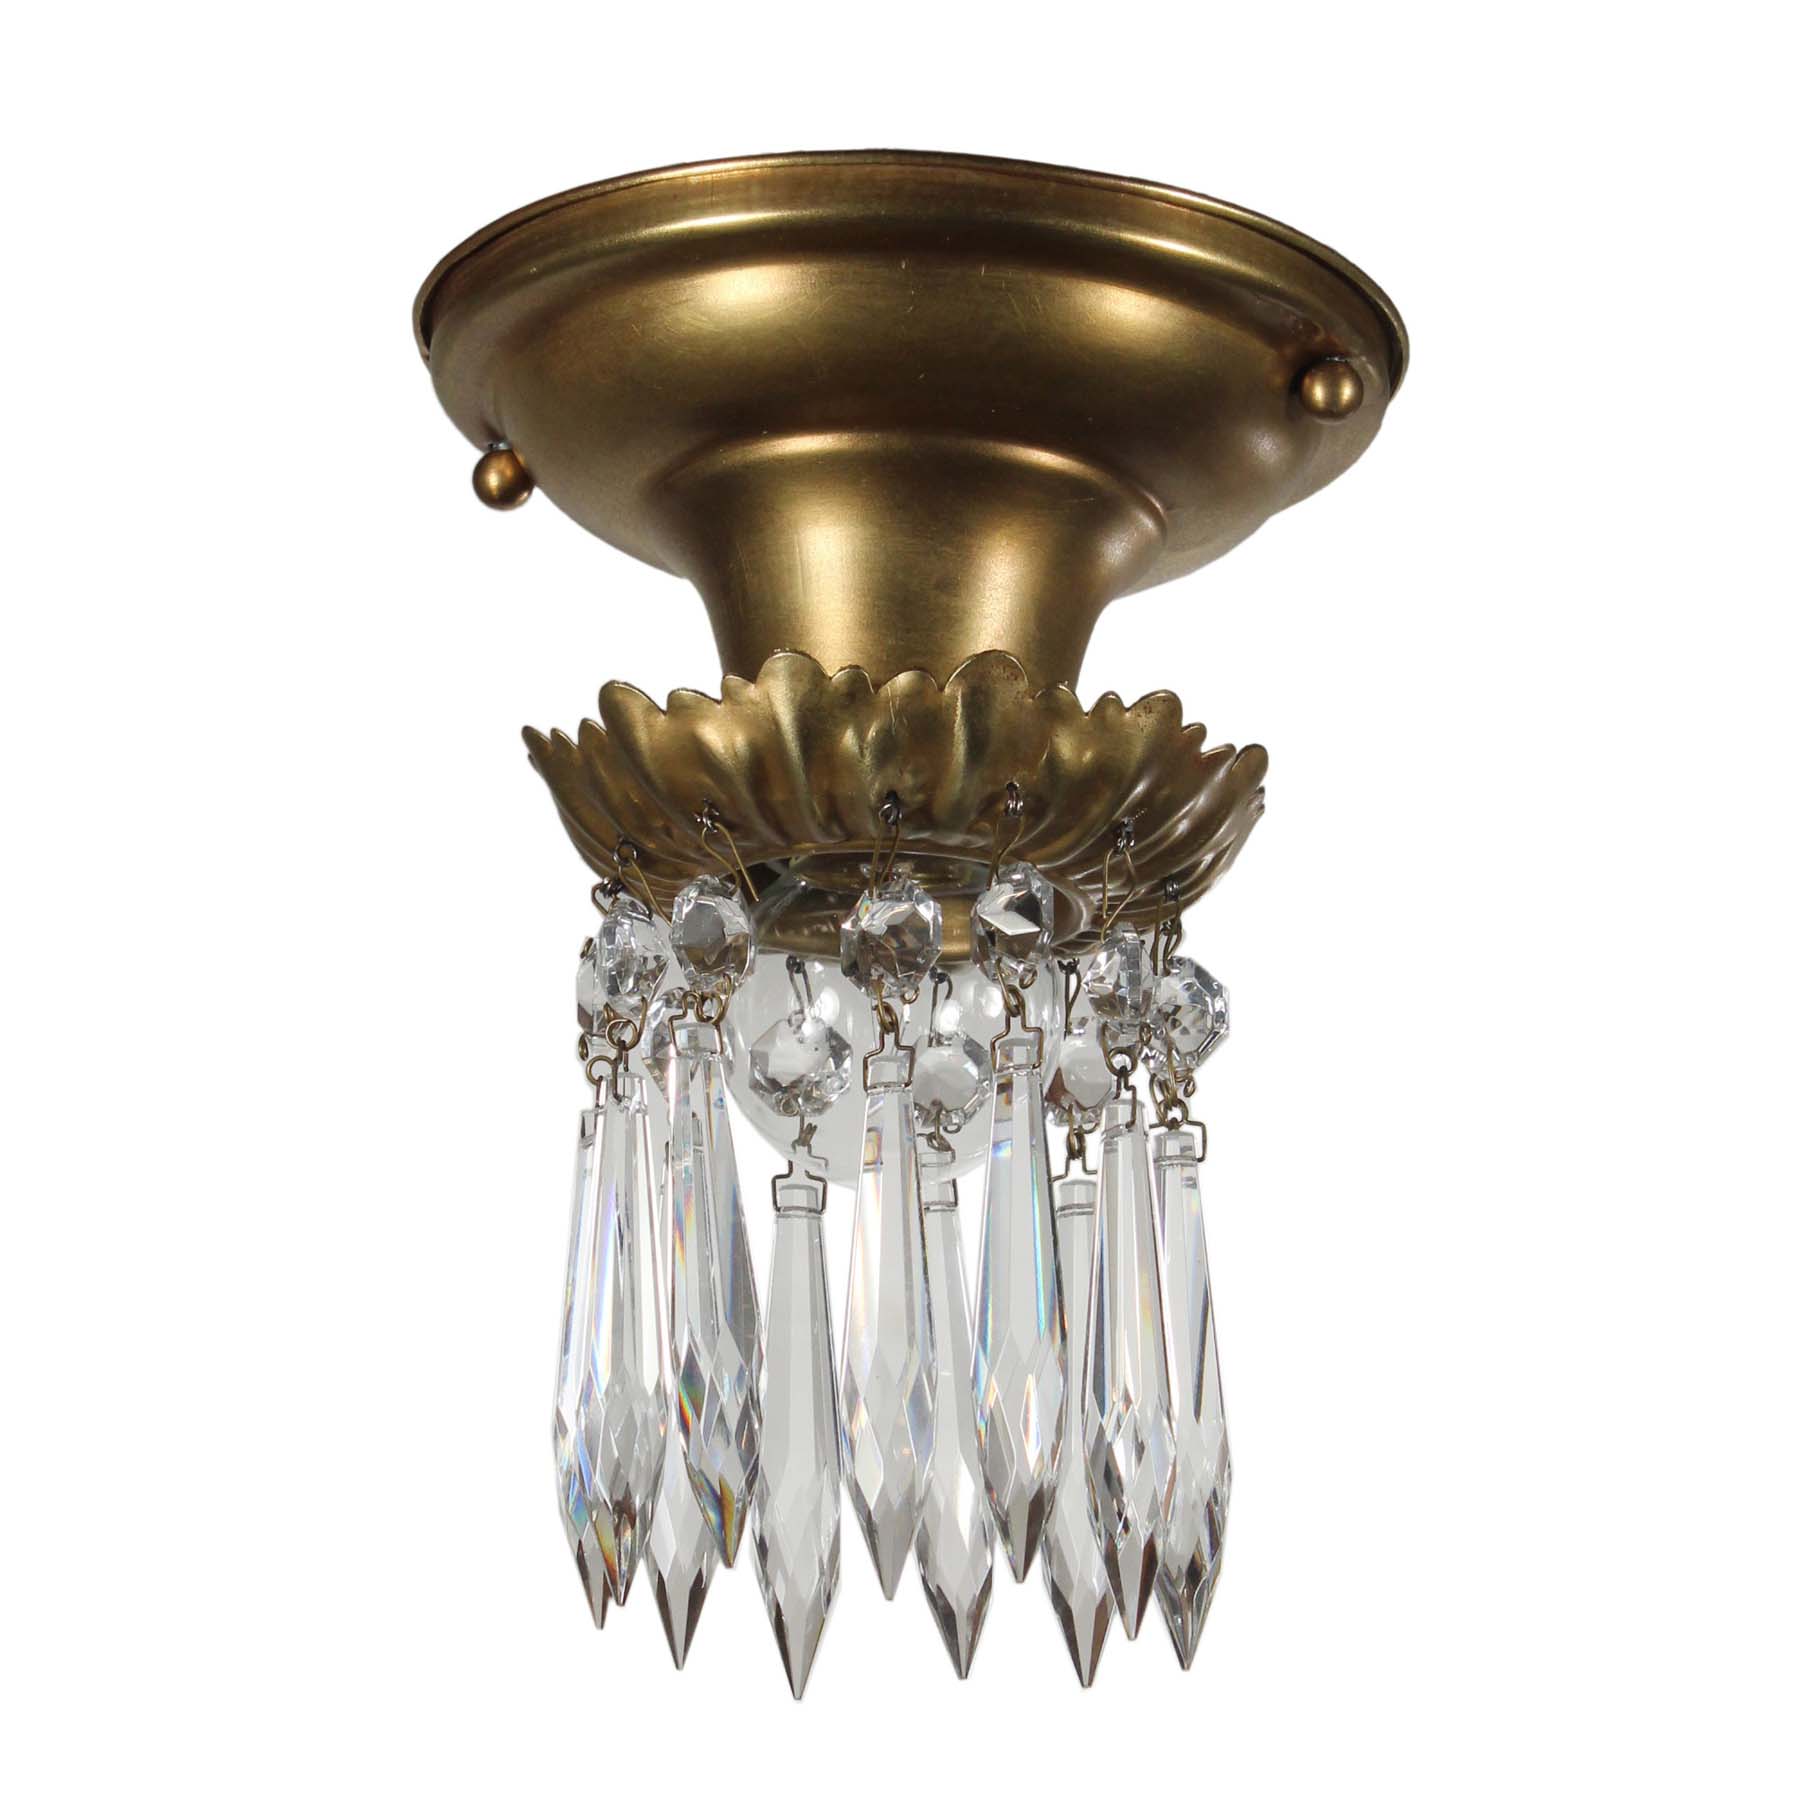 SOLD Antique Brass Flush-Mount Lights with Exposed Bulbs and Prisms-67118